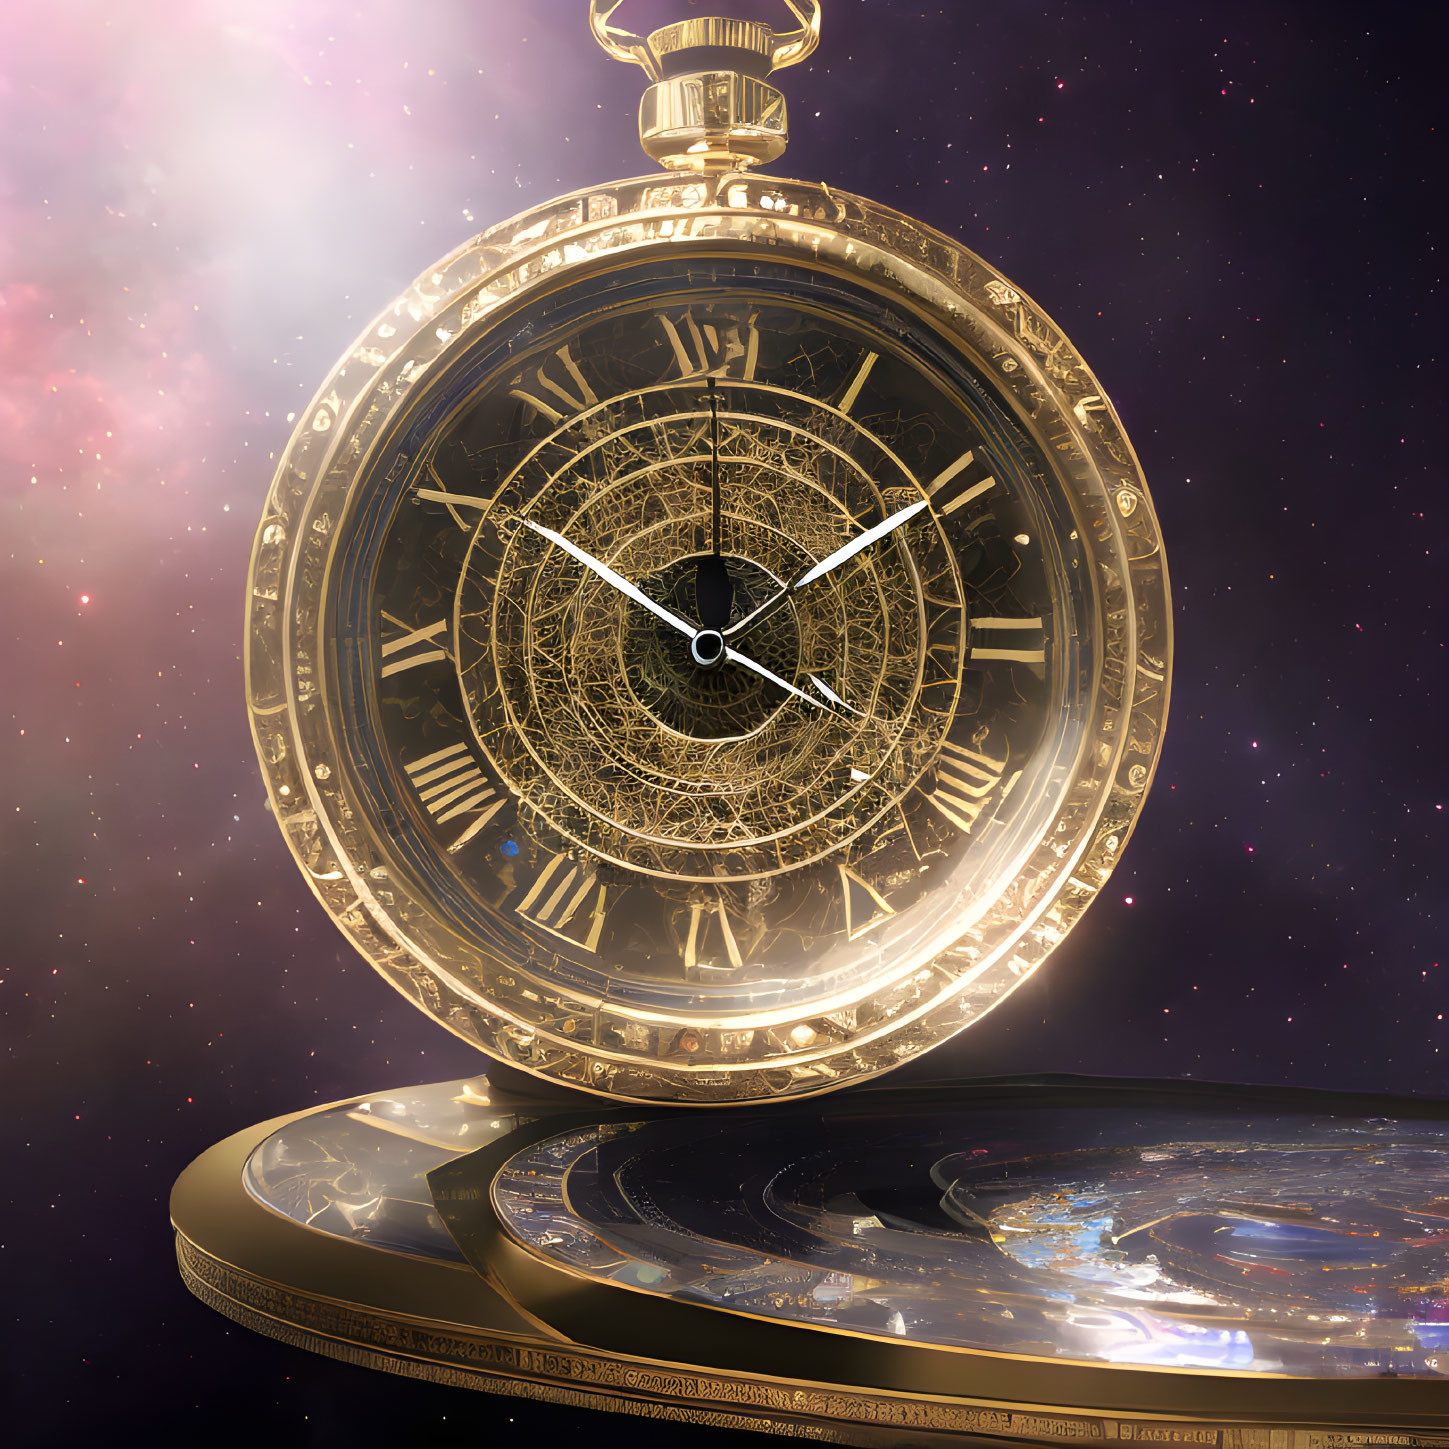 Golden Pocket Watch Floating in Cosmic Space with Galaxy Background